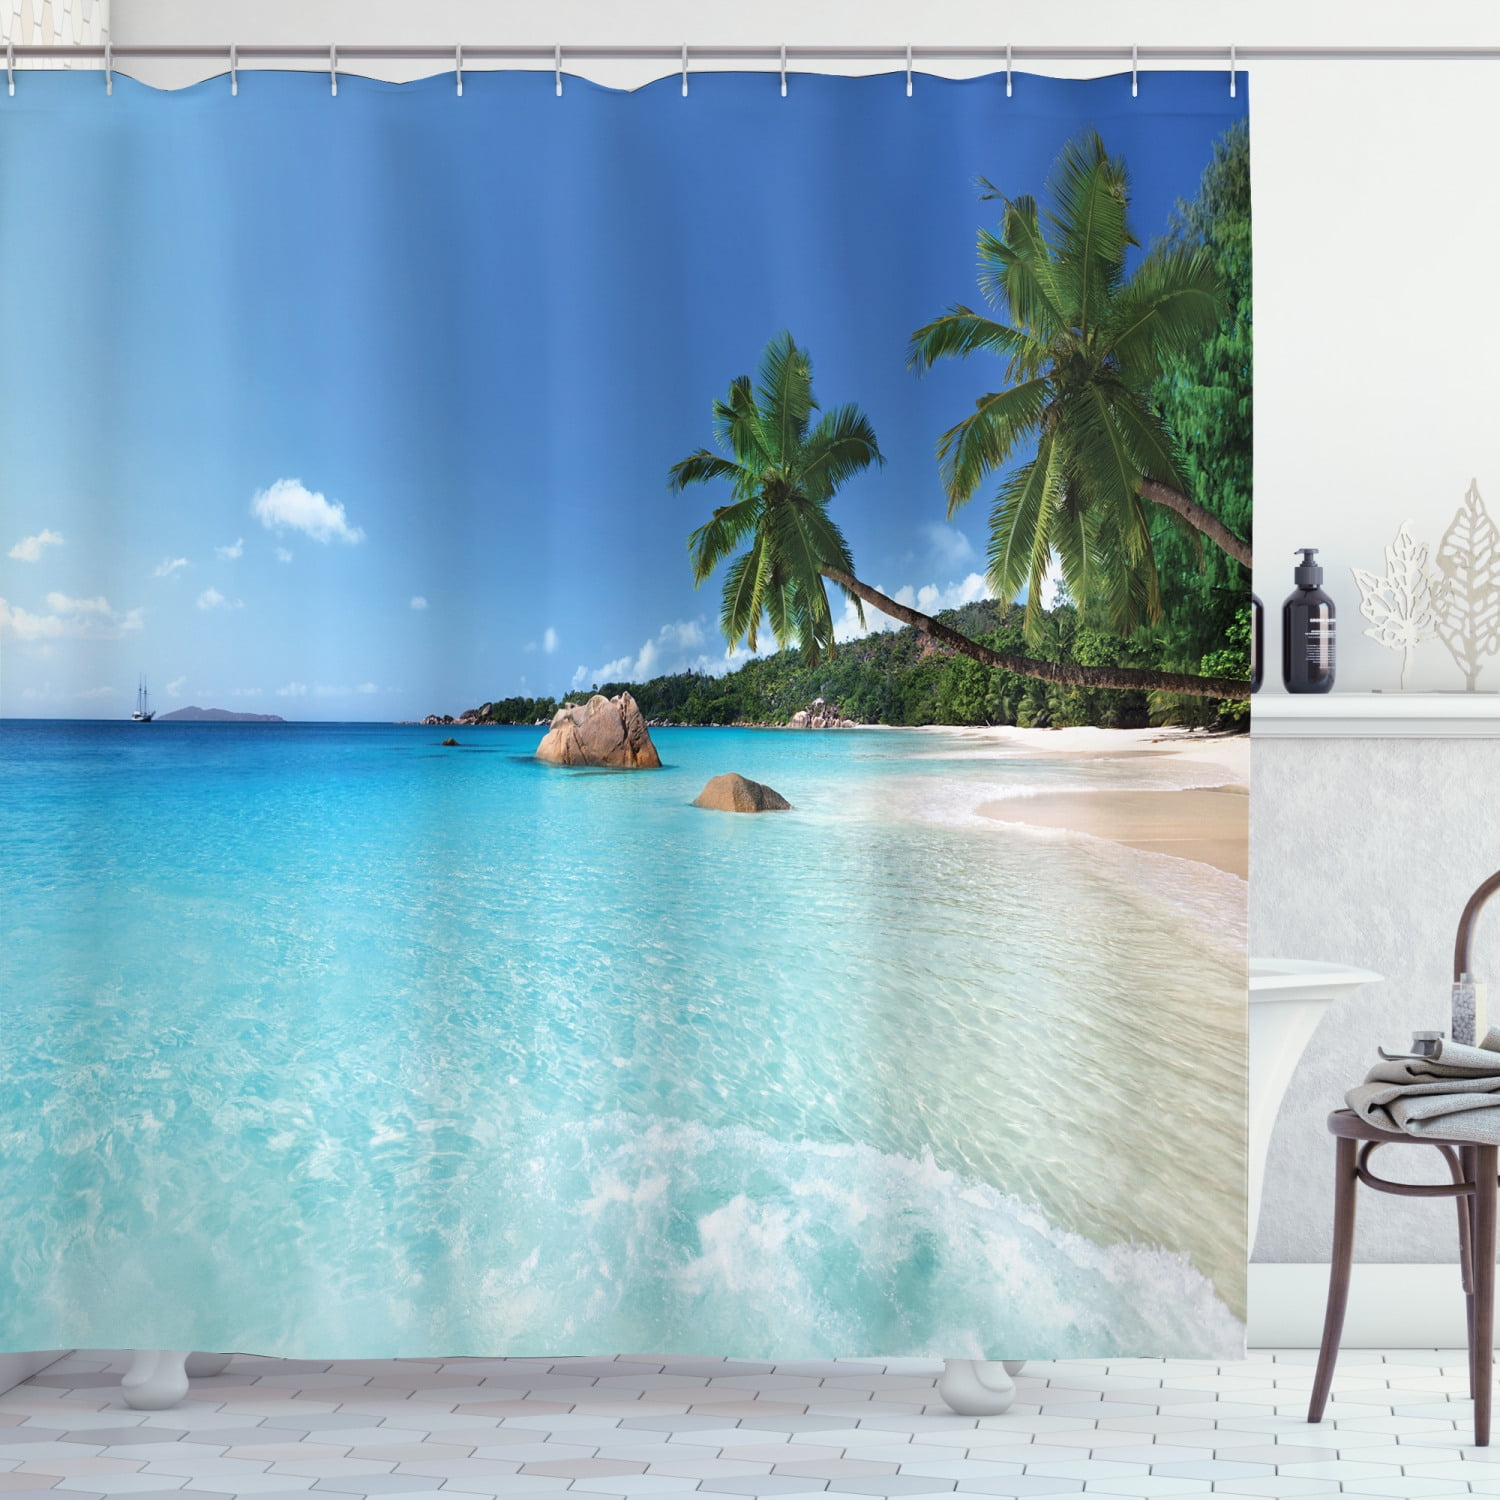 Details about   Sunny Horizon and Transparent Water Isolated Beach Picture Fabric Shower Curtain 